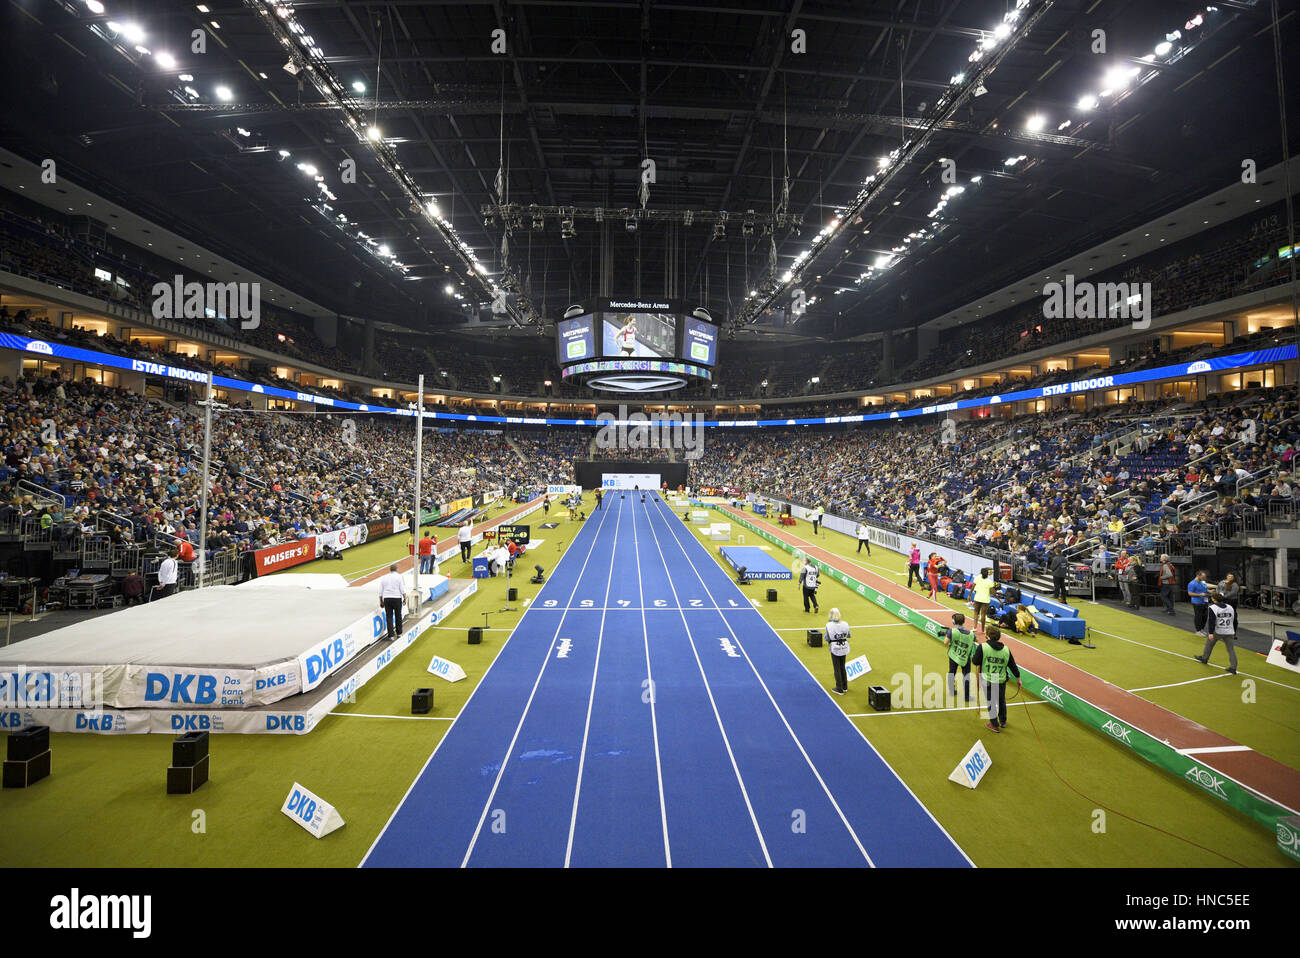 Berlin, Germany. 10th February 2017. ISTAF Indoor 2017, Mercedes-Benz Arena in Berlin, Germany. 10th February, 2017. Arena was filled to capacity on the night Credit: Paul Velasco/Alamy Live News Stock Photo